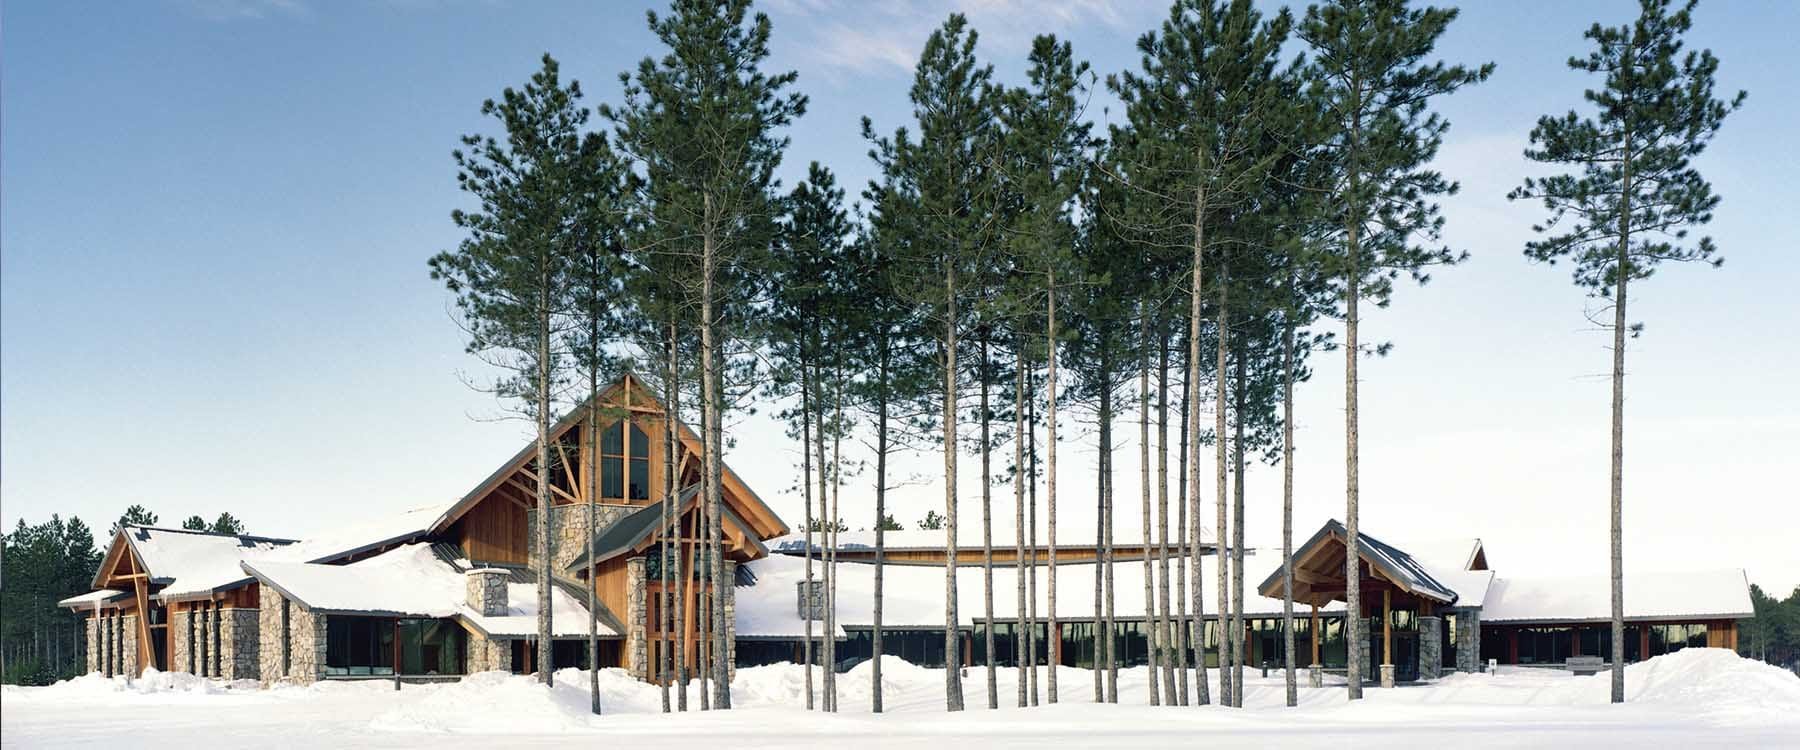 Holy Family Catholic Church in Woodruff, Wisconsin is a contemporary interpretation of Catholic architect. The design of the church incorporates masonry, glue-lam beams and columns, and is designed to provide a peaceful worship in the snowy landscape of upper Wisconsin